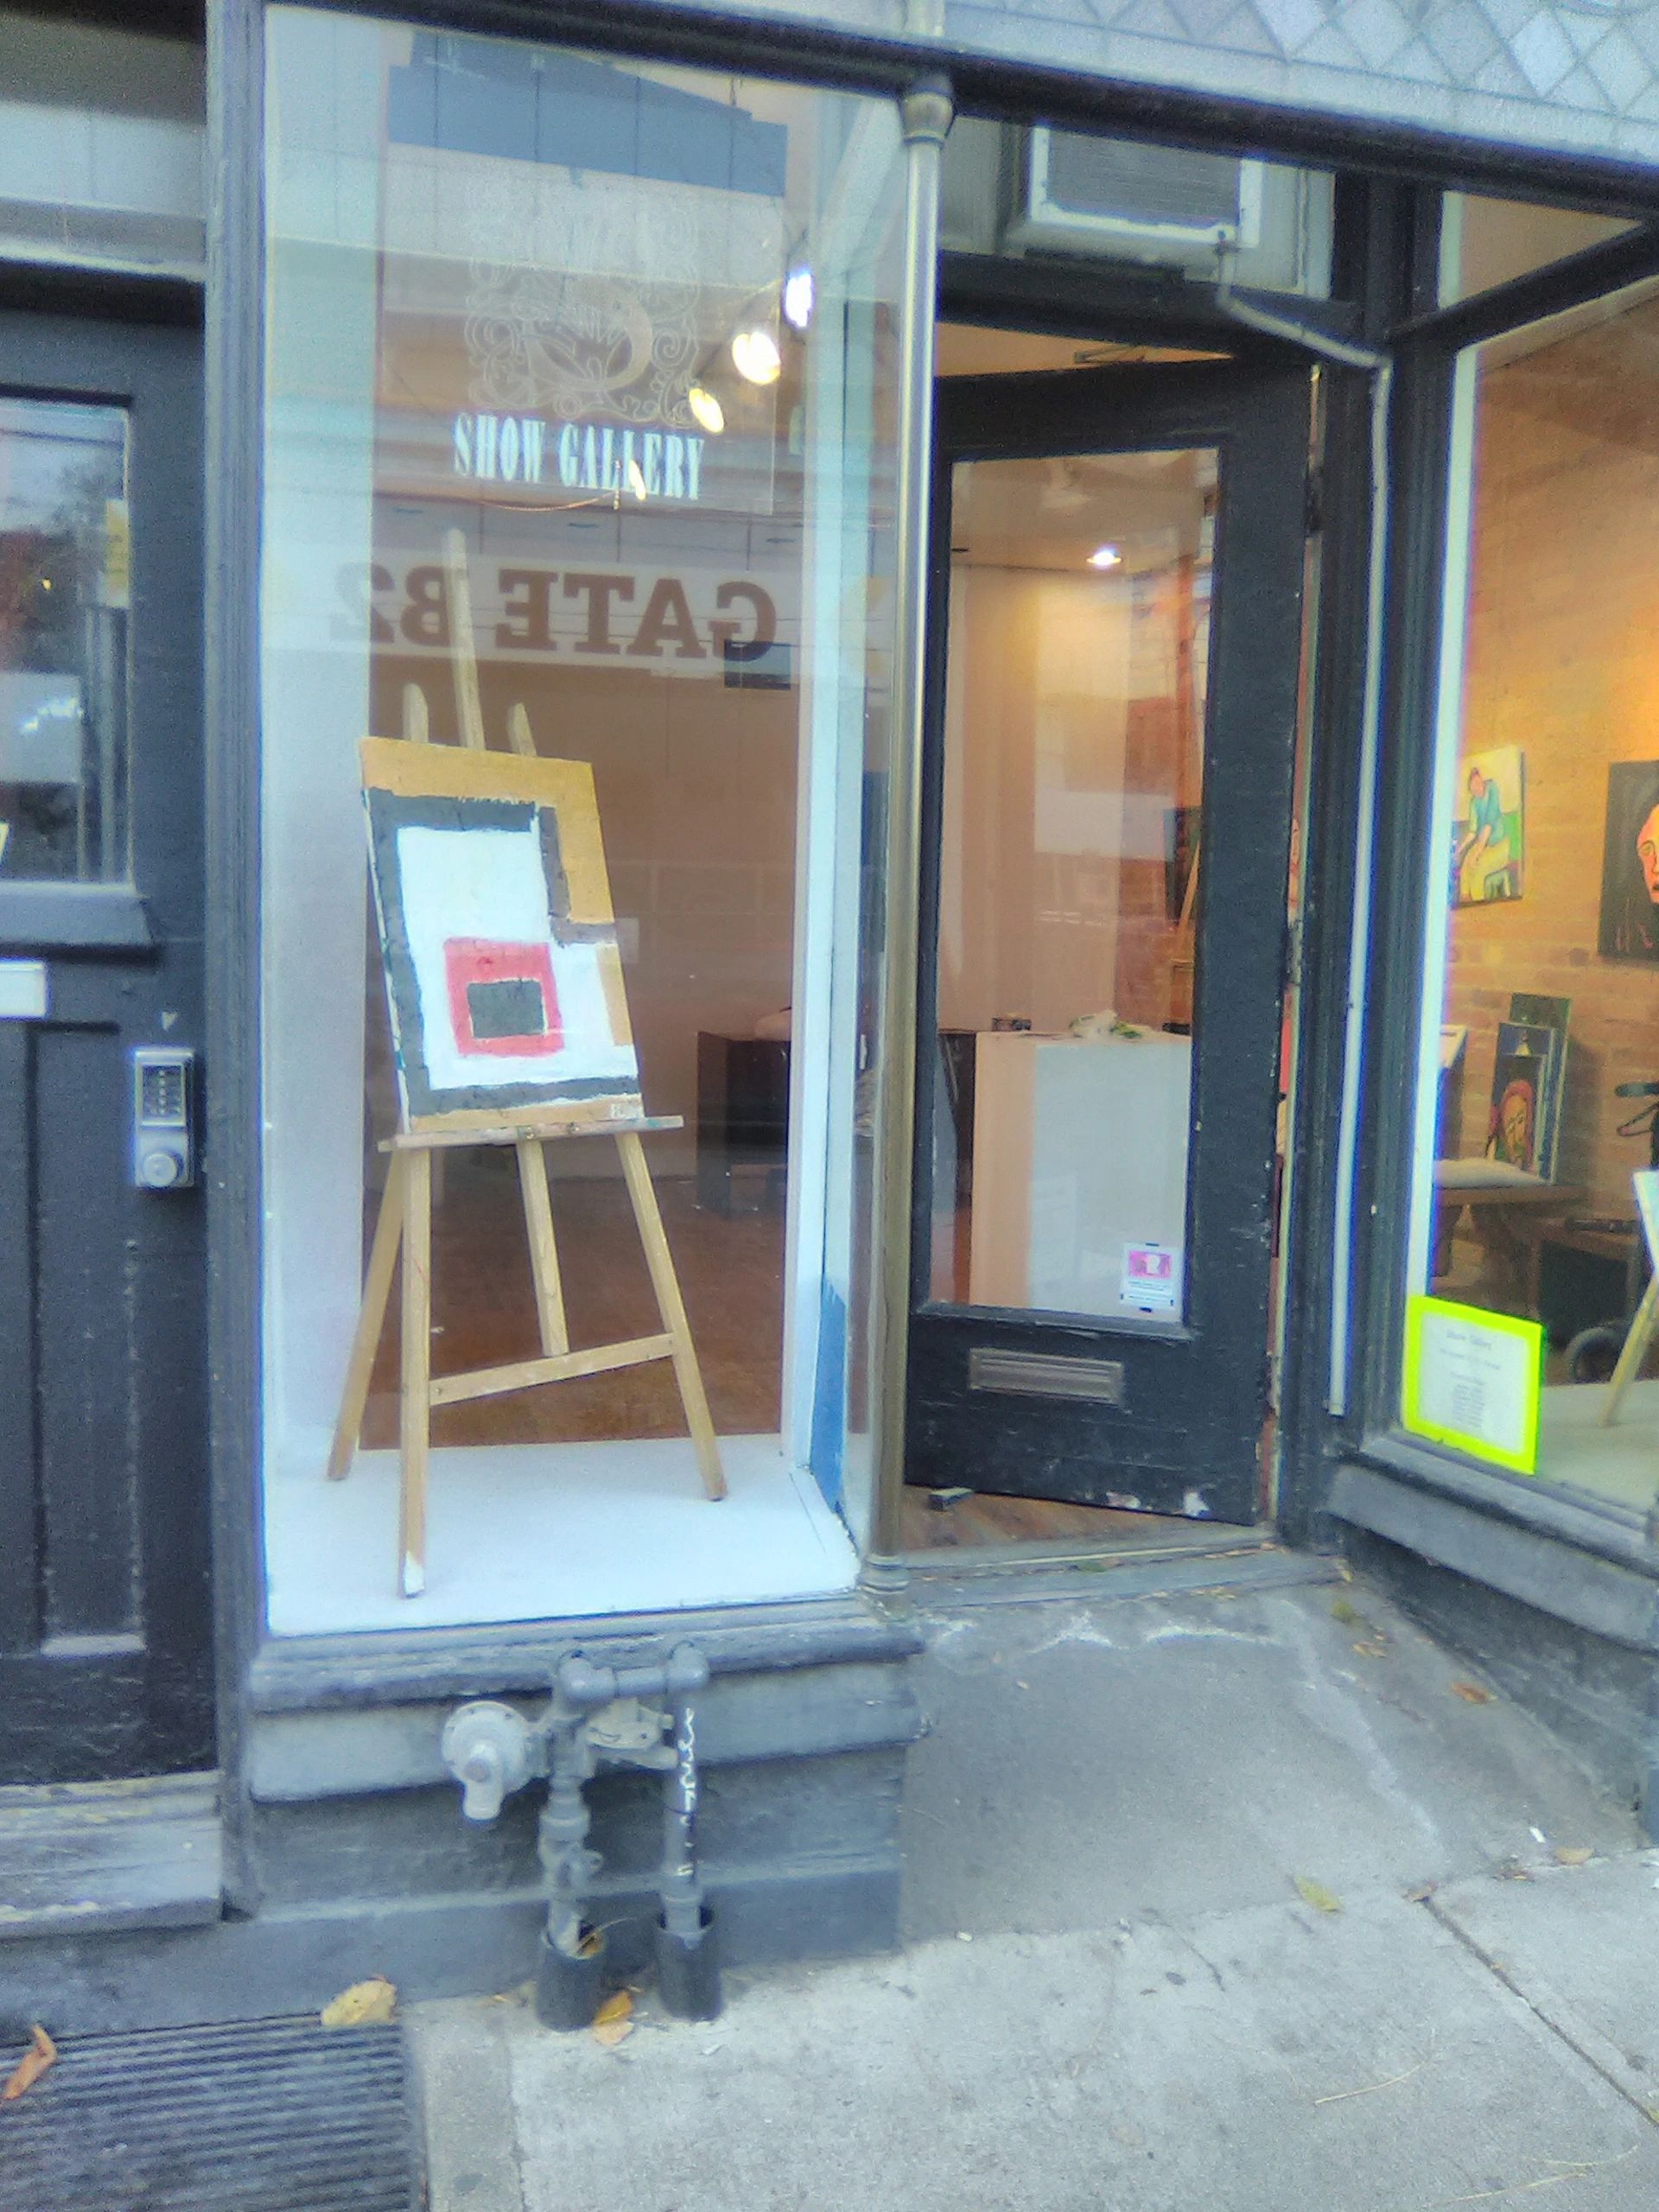 Show Gallery at 978 Queen St. W. Toronto